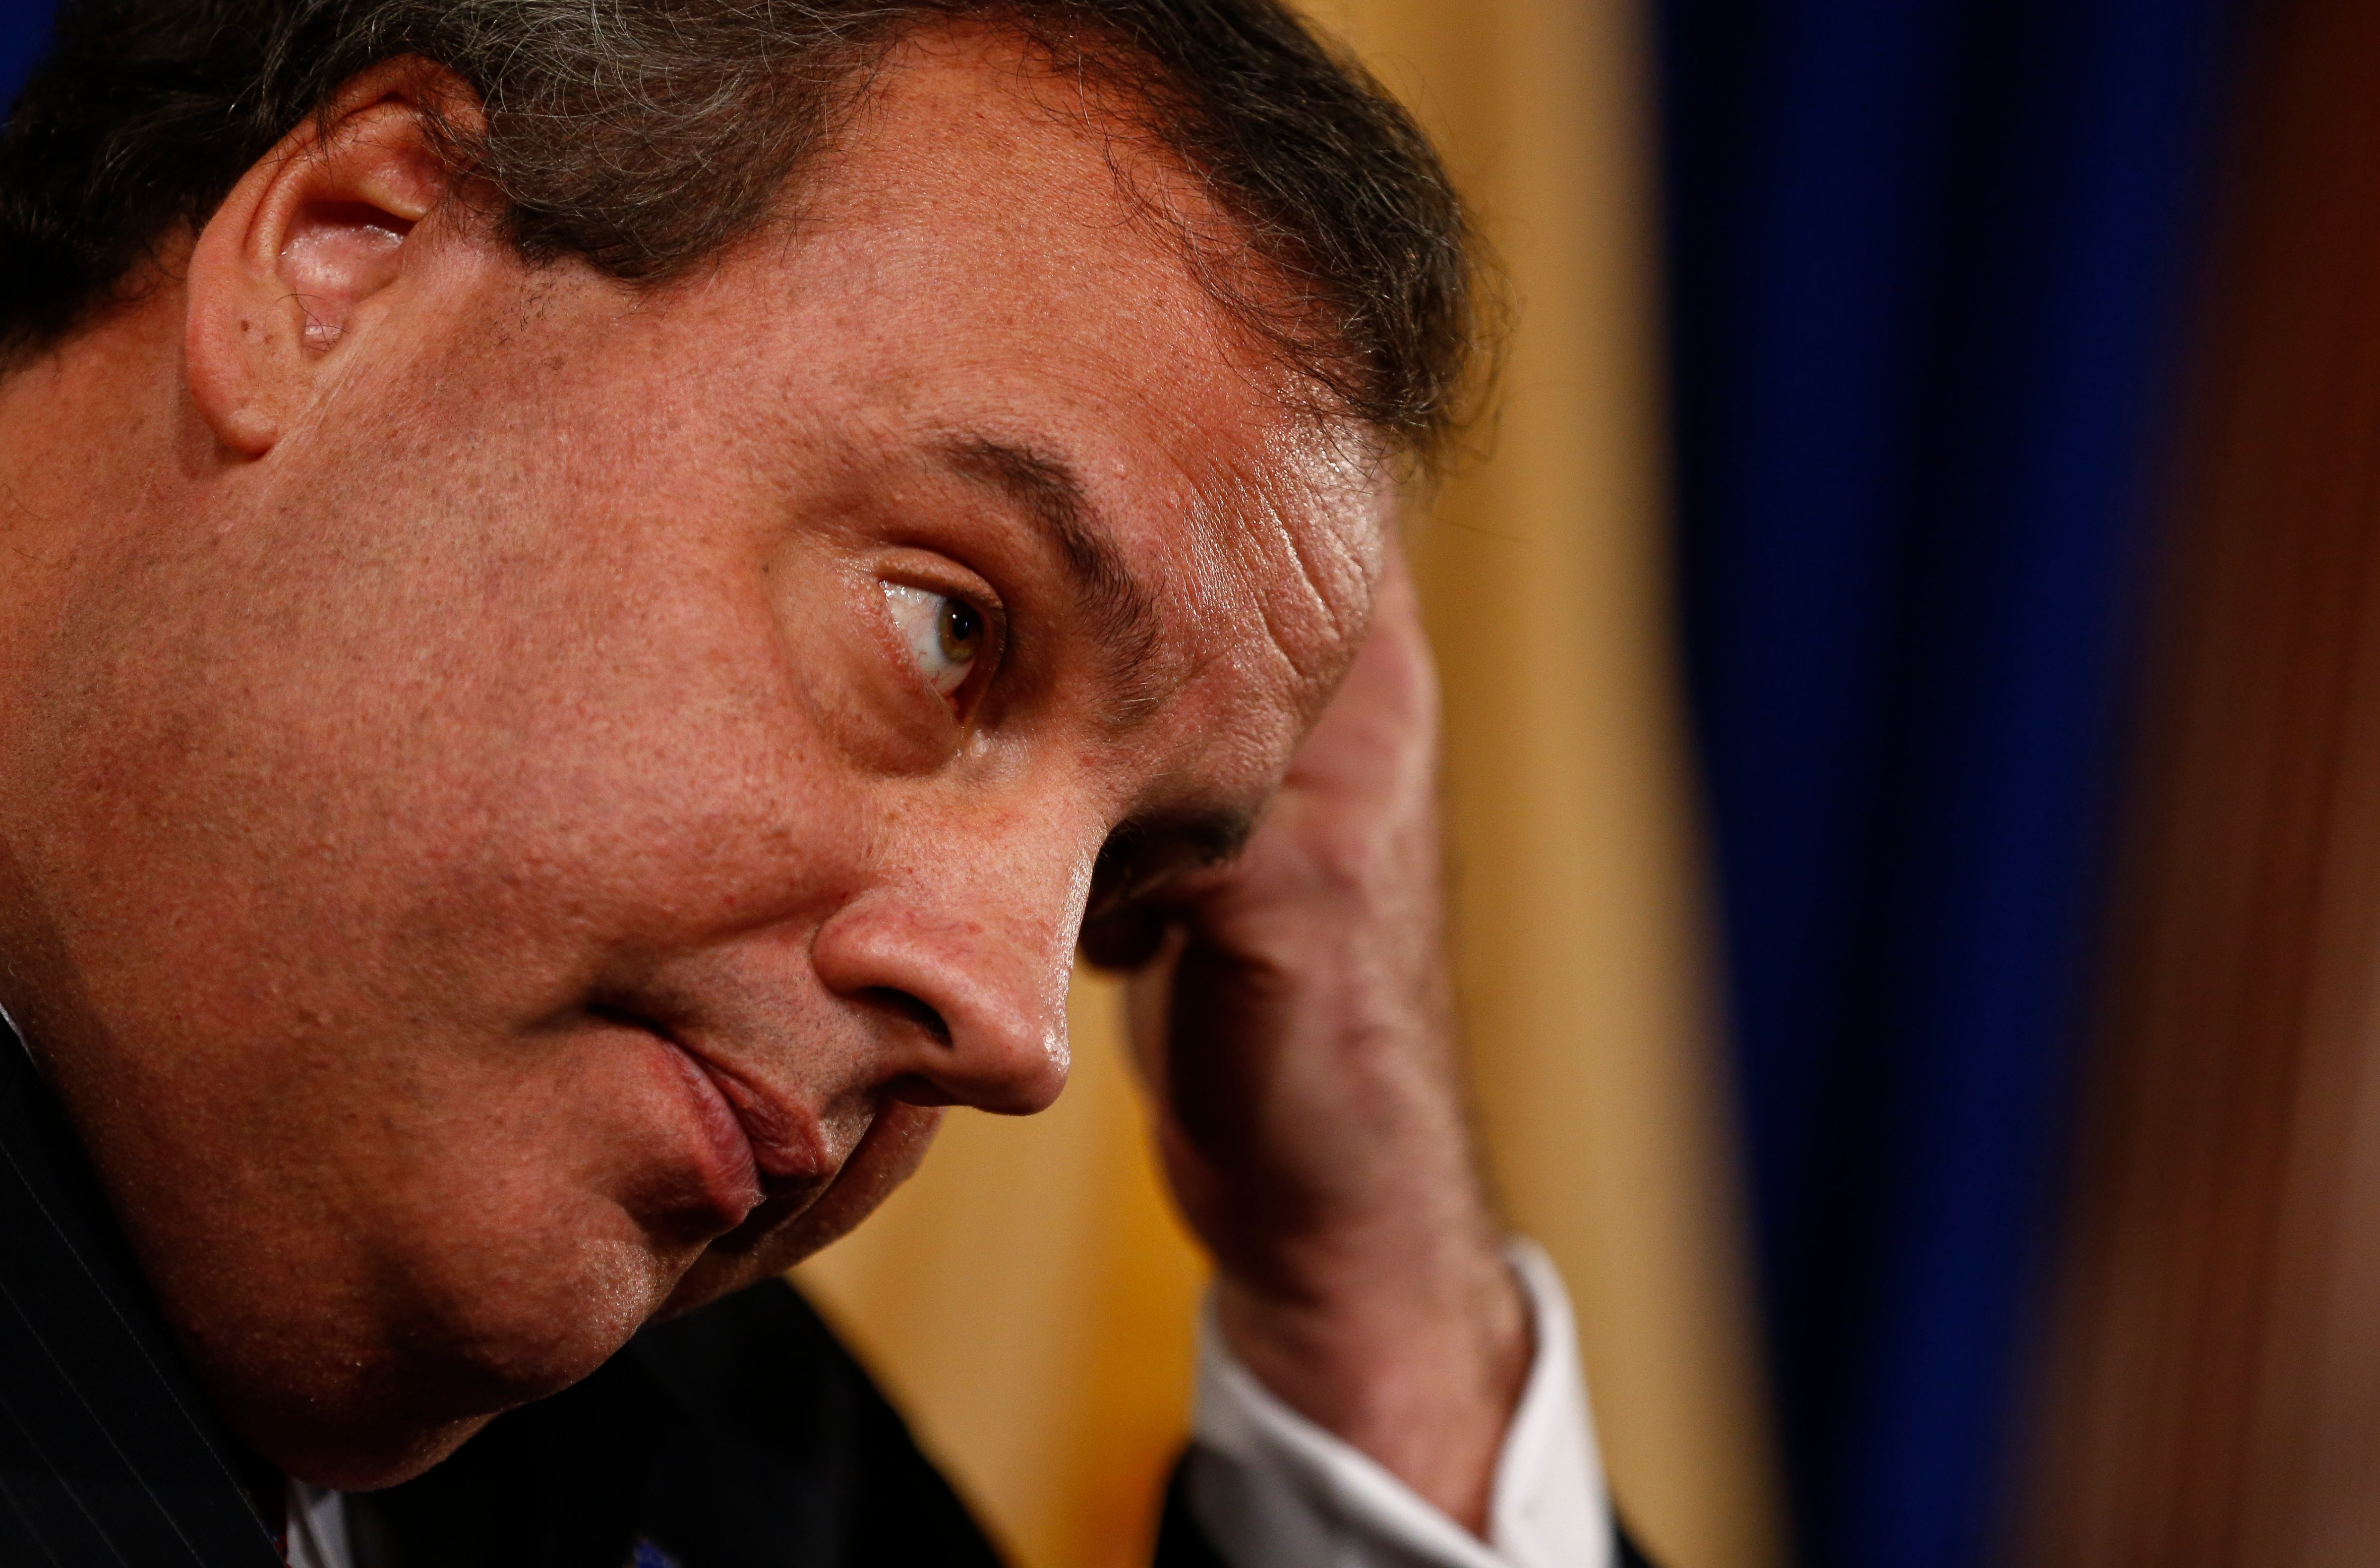 Did I say that? The NJ gov has medical wisdom to share